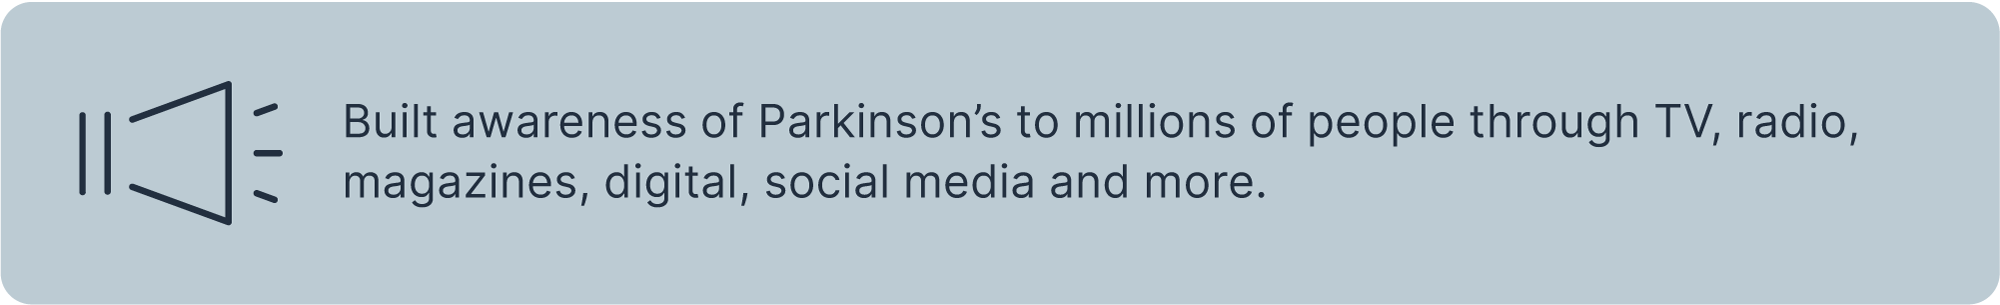 Built awareness of Parkinson’s to millions of people through TV, radio, magazines, digital, social media and more.